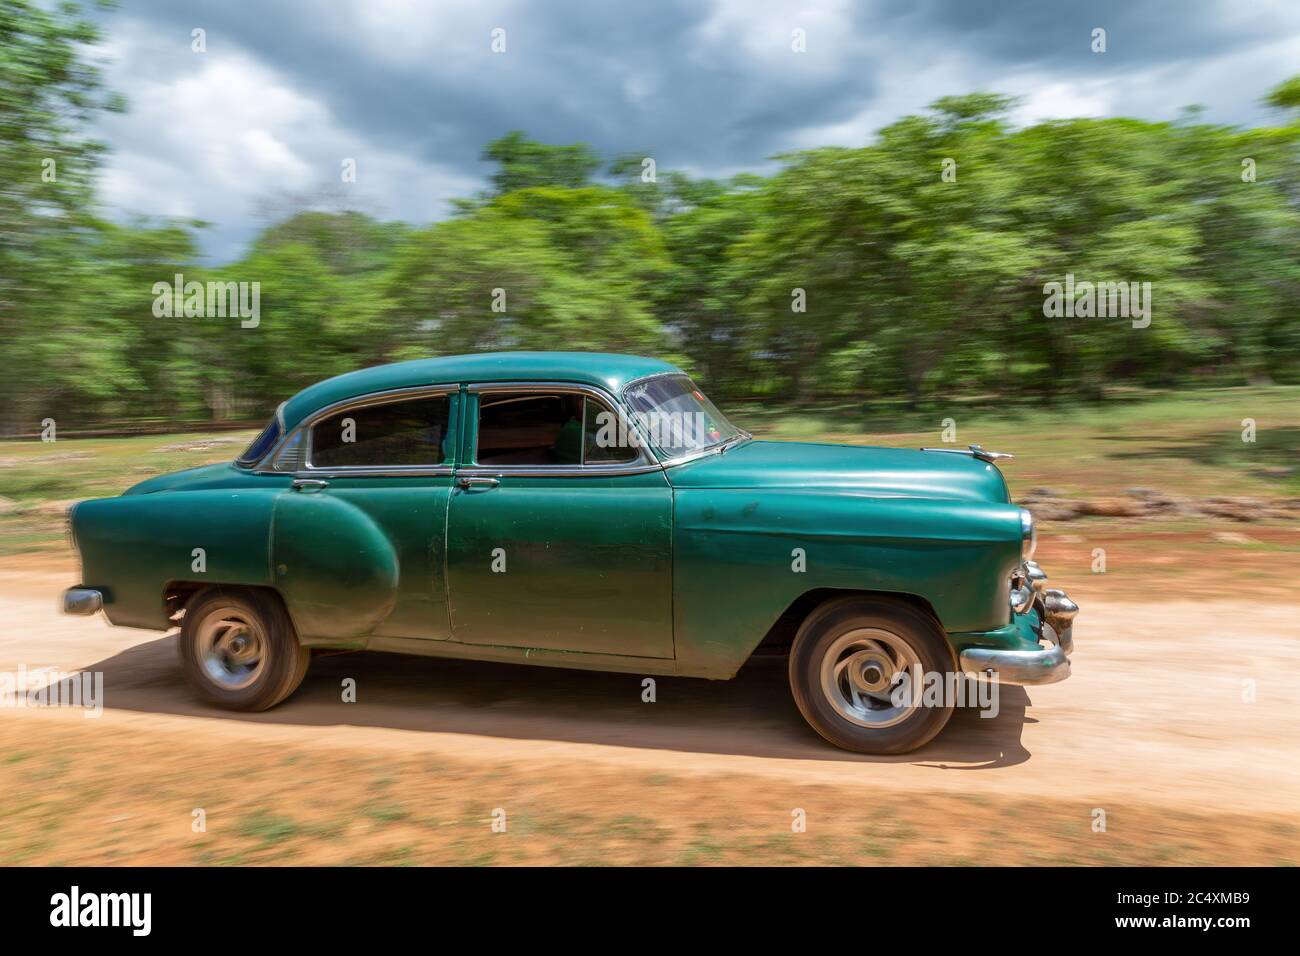 HAVANA, CUBA - CIRCA 2017: Panning on an American green classic car in the streets of Havana, transporting tourists. Concept of tourism having fun. Stock Photo